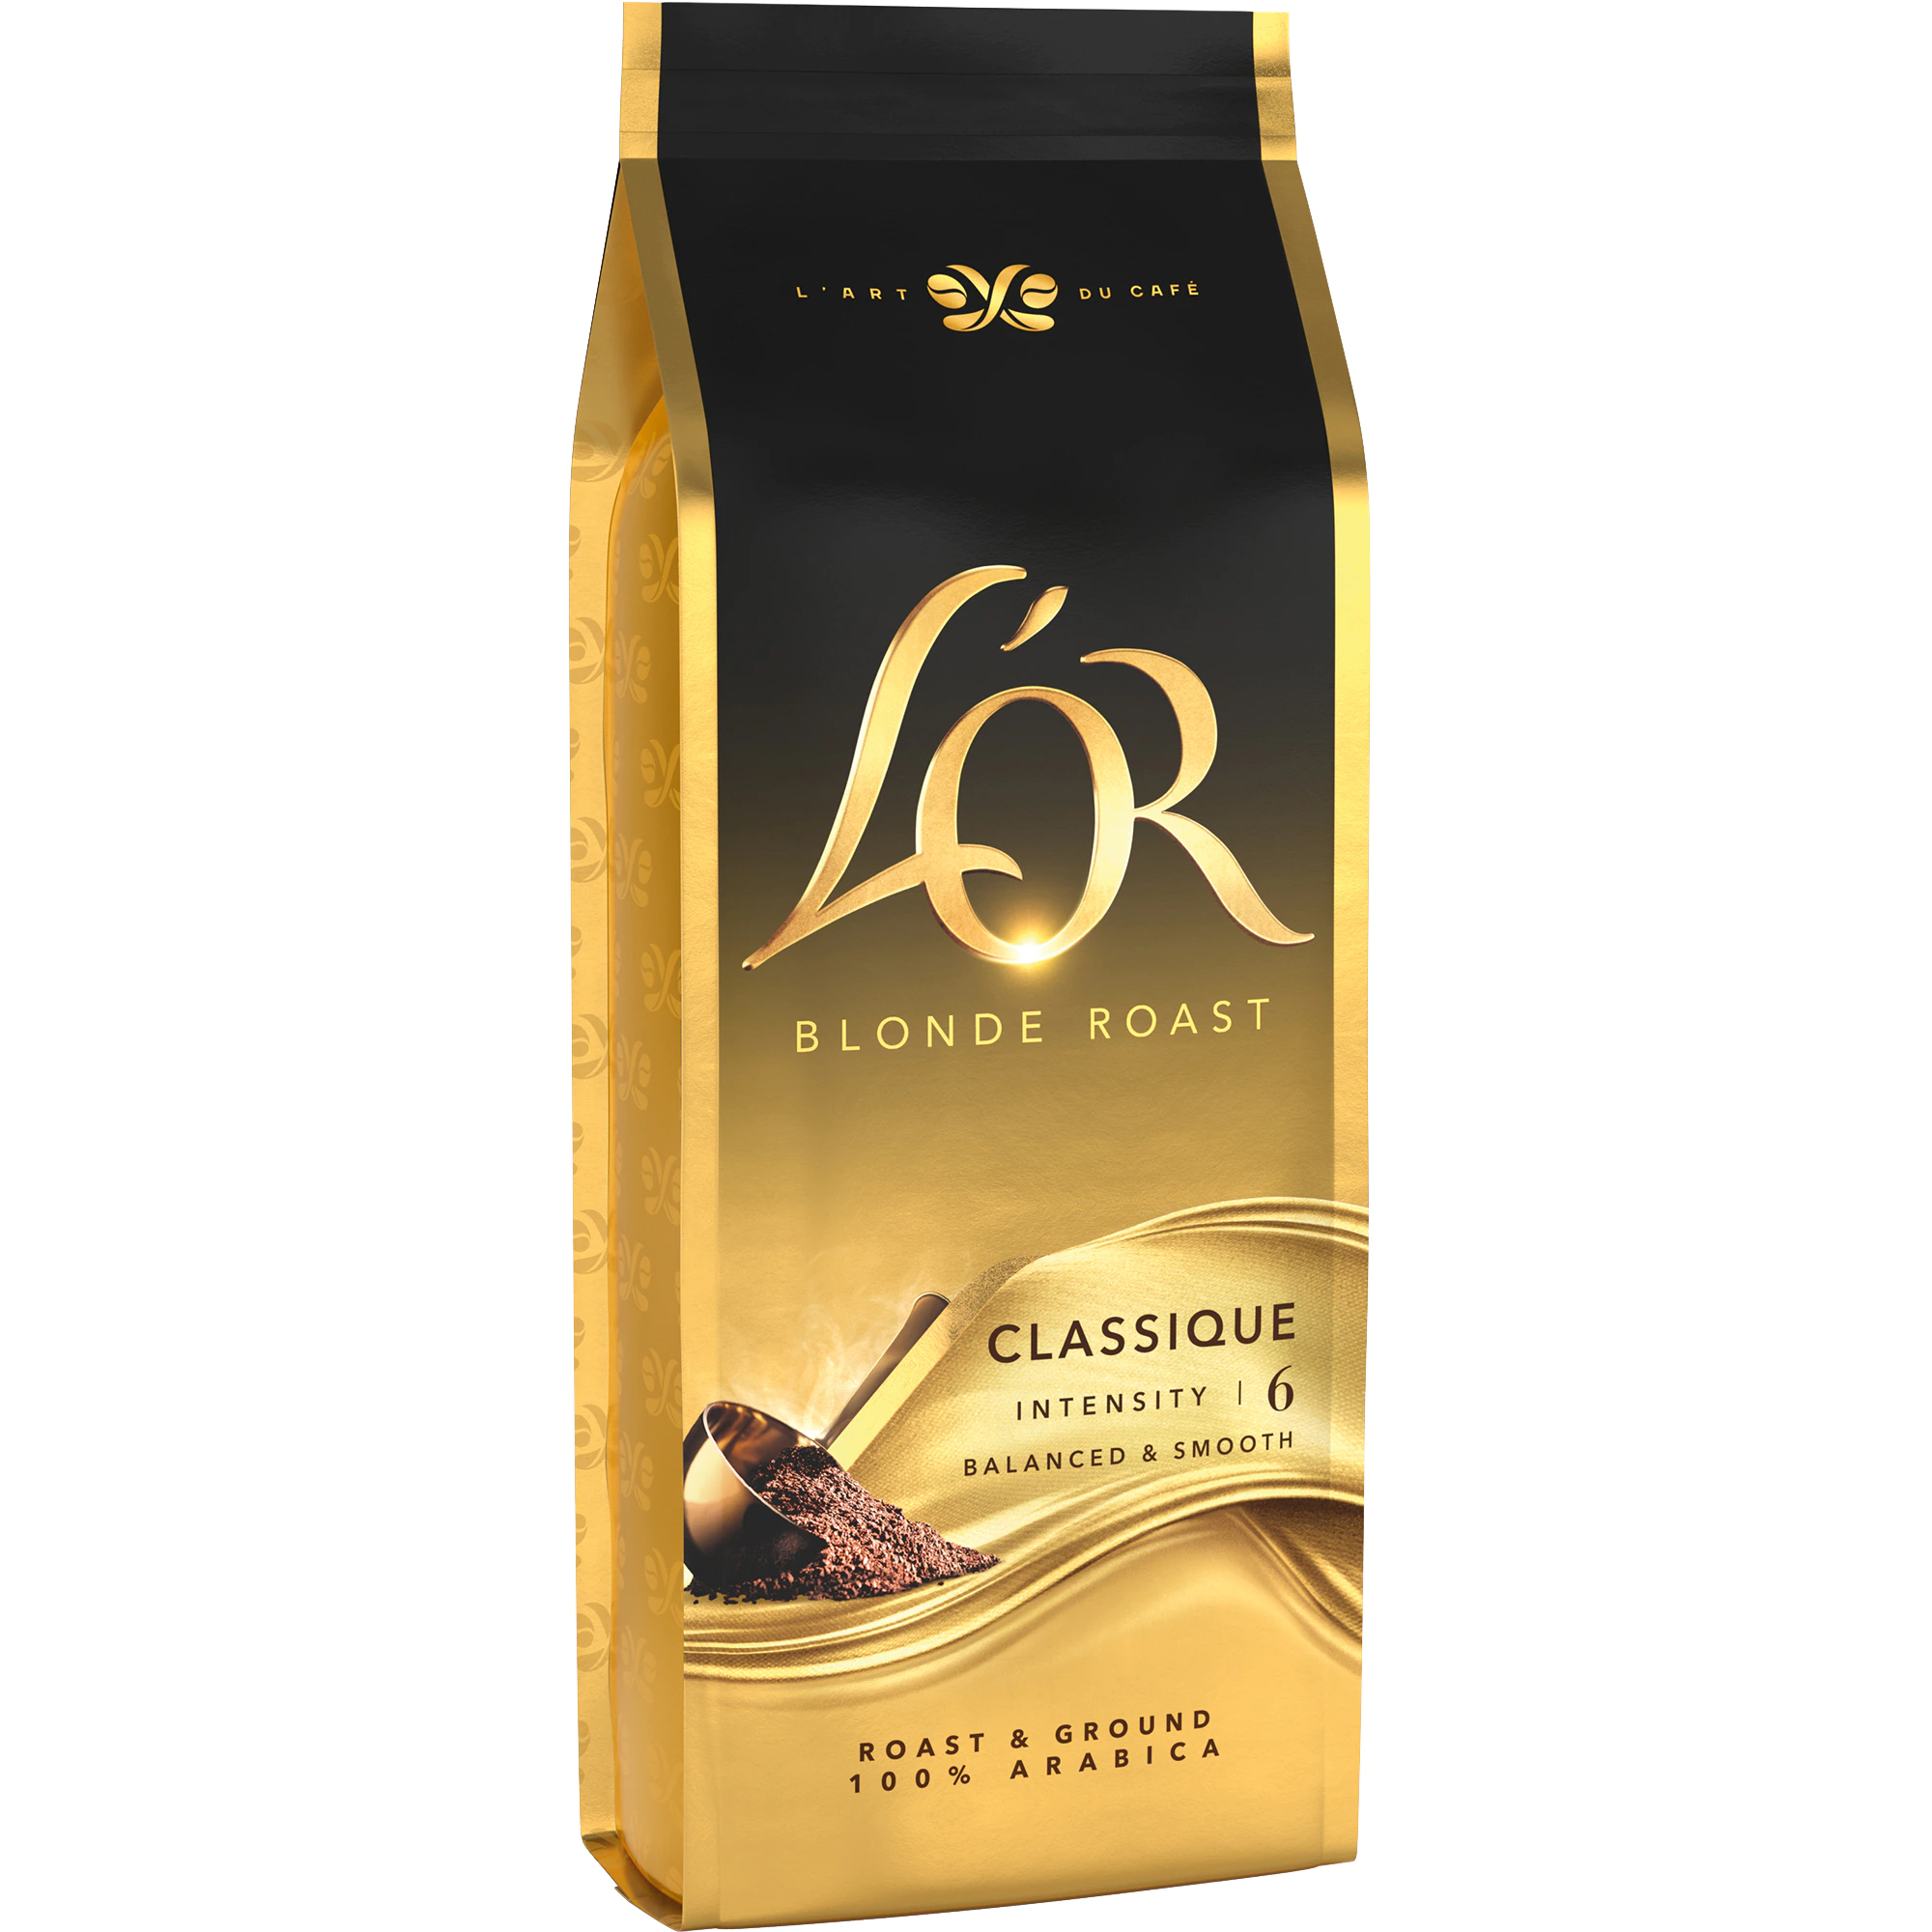 L'OR Crema Absolu Clasique Cafea Boabe 500g [0]